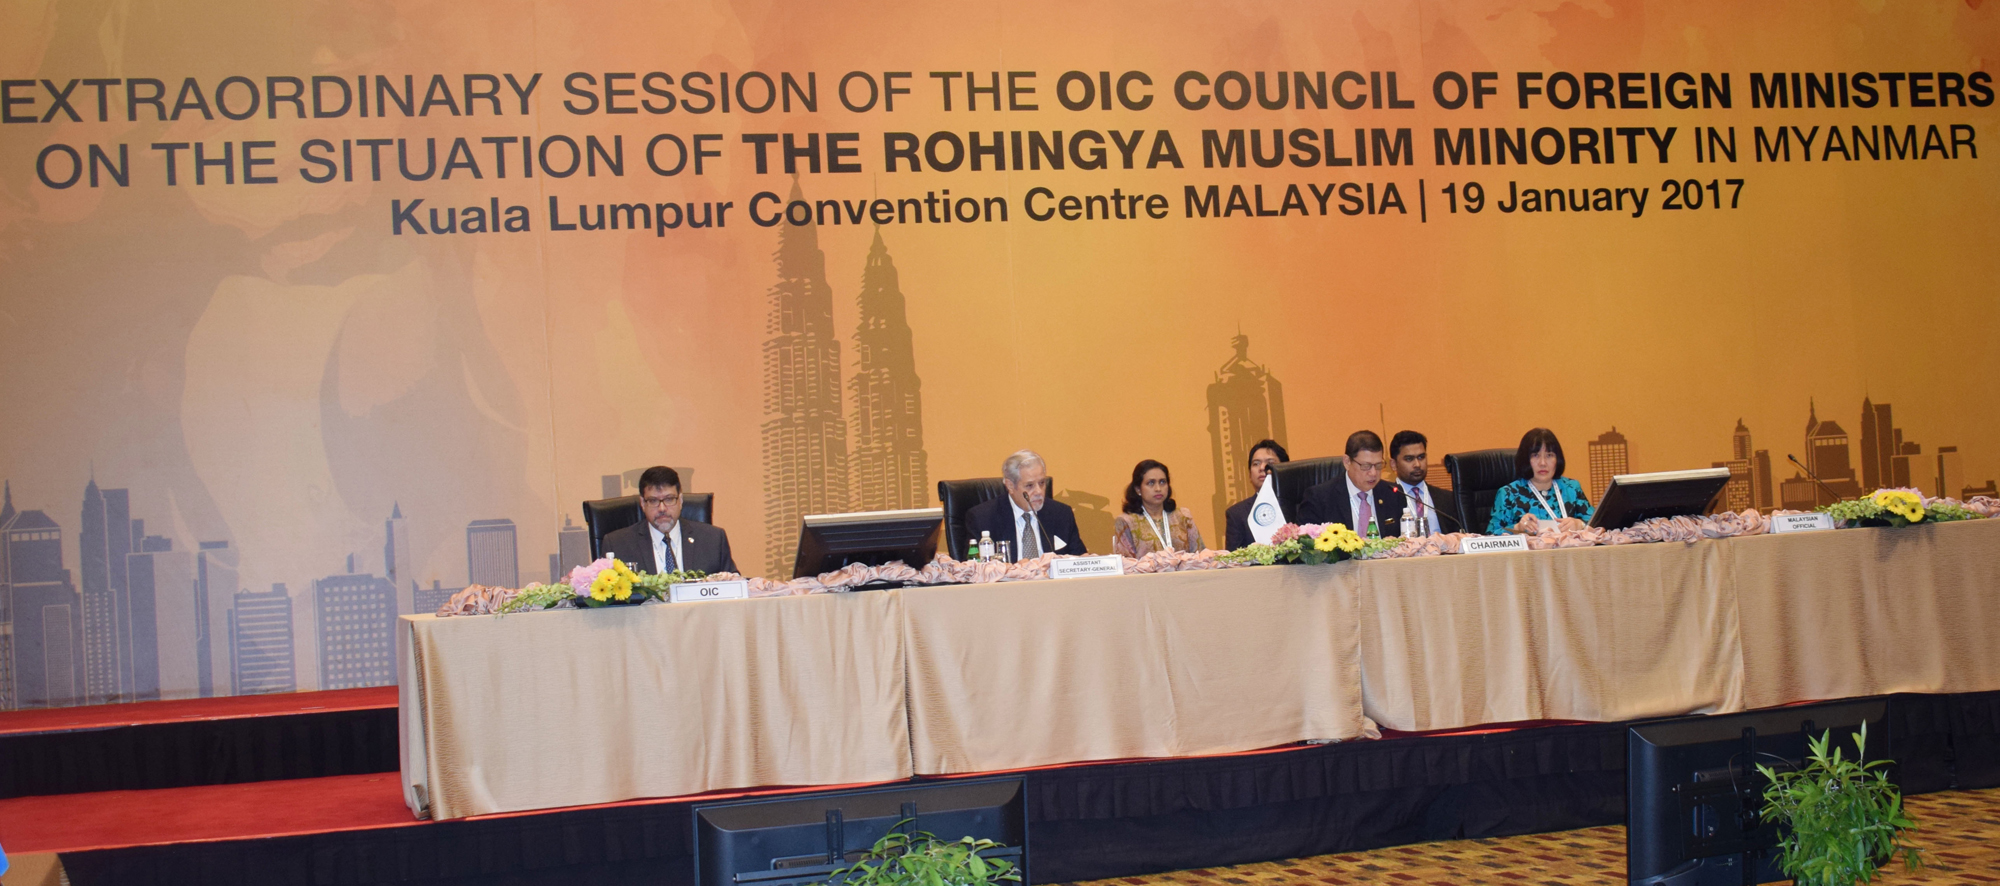 Part of the meeting senior officials from member states of OIC